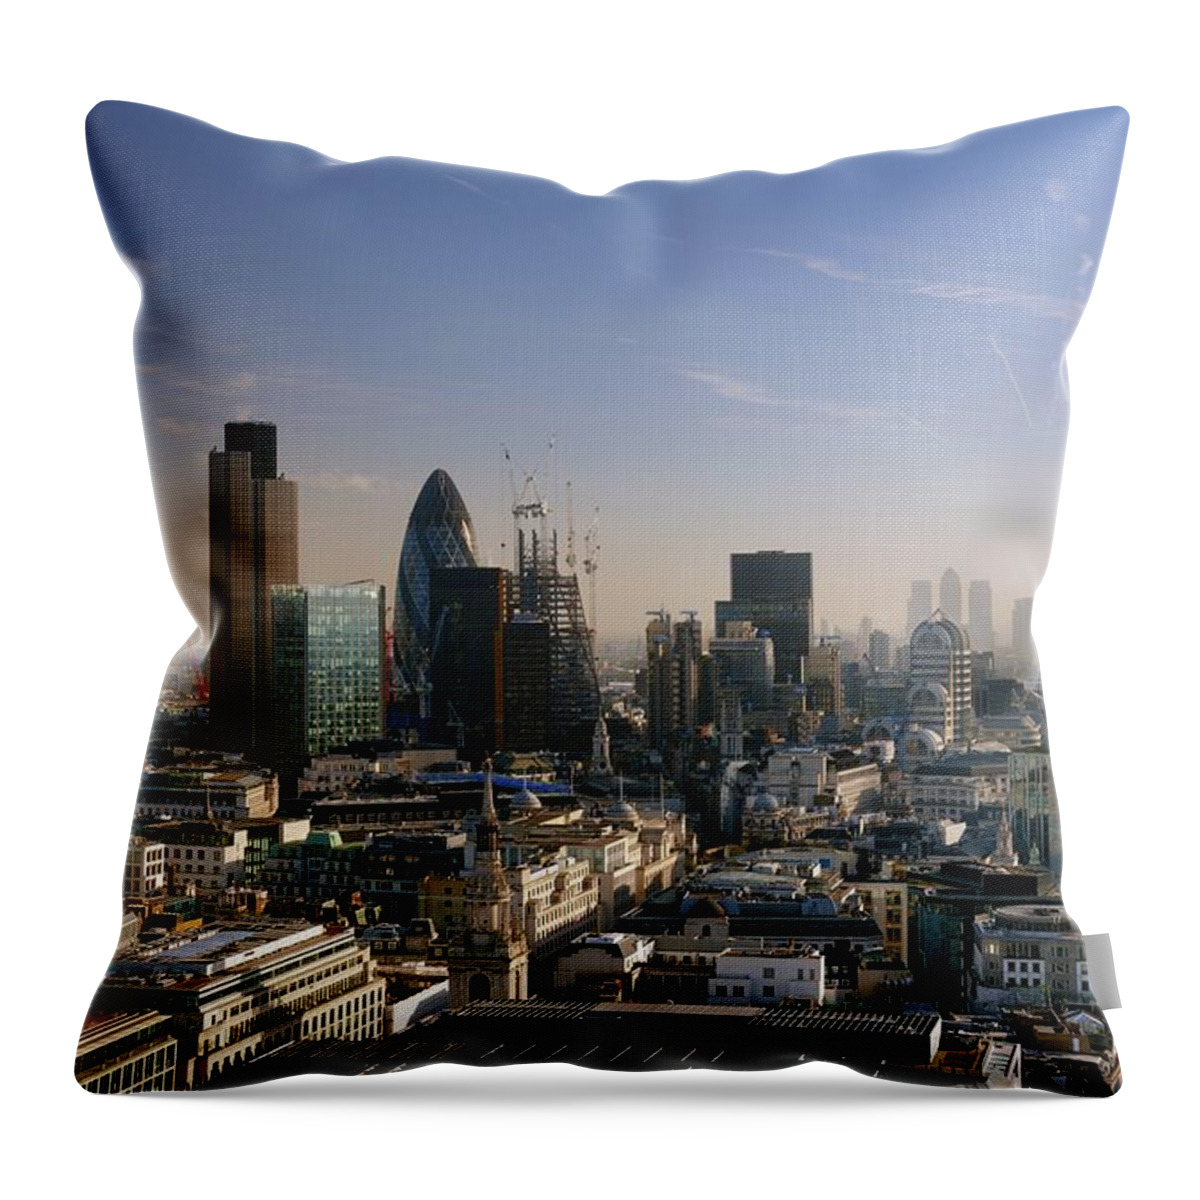 Tranquility Throw Pillow featuring the photograph City Of London Elevated View by Vladimir Zakharov